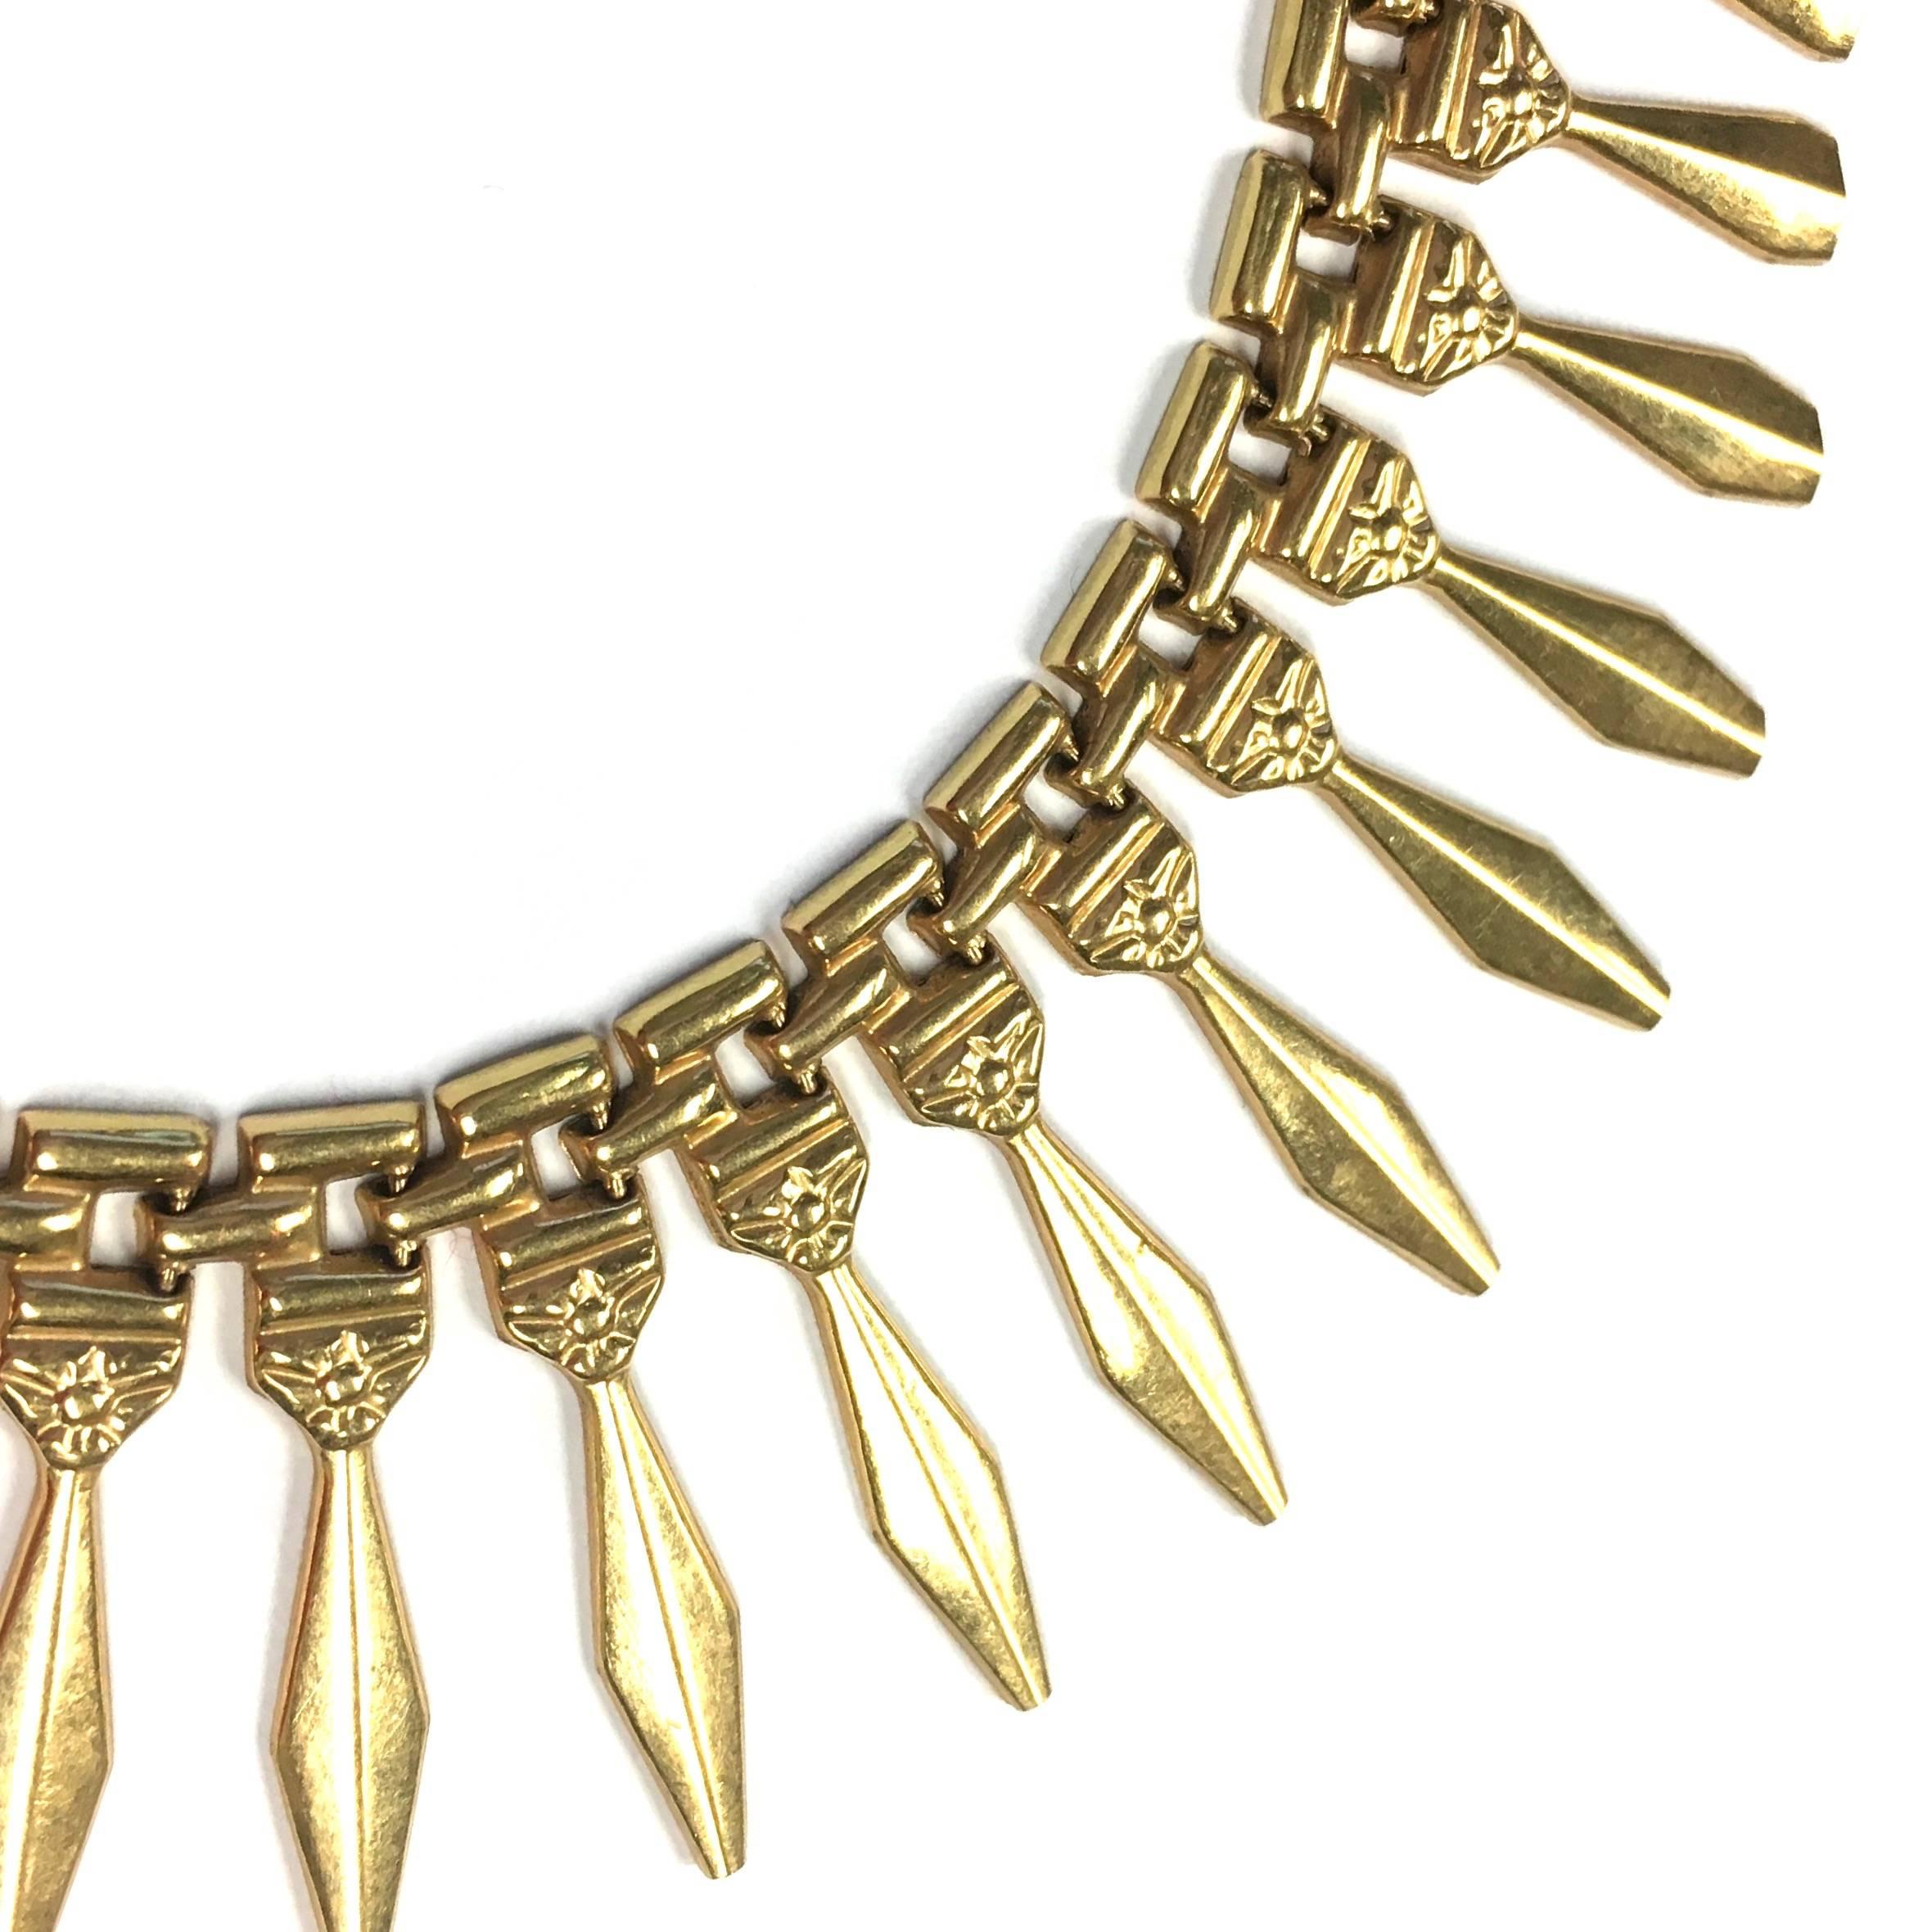 Gorgeous 18K yellow gold necklace decorated by graduating gold stylish links on the front. 
Marked with the french import gold mark and the italian manufacturer's hallmark. Circa 1960's. 
Length: 16 inches
Weight: 25.8 grams